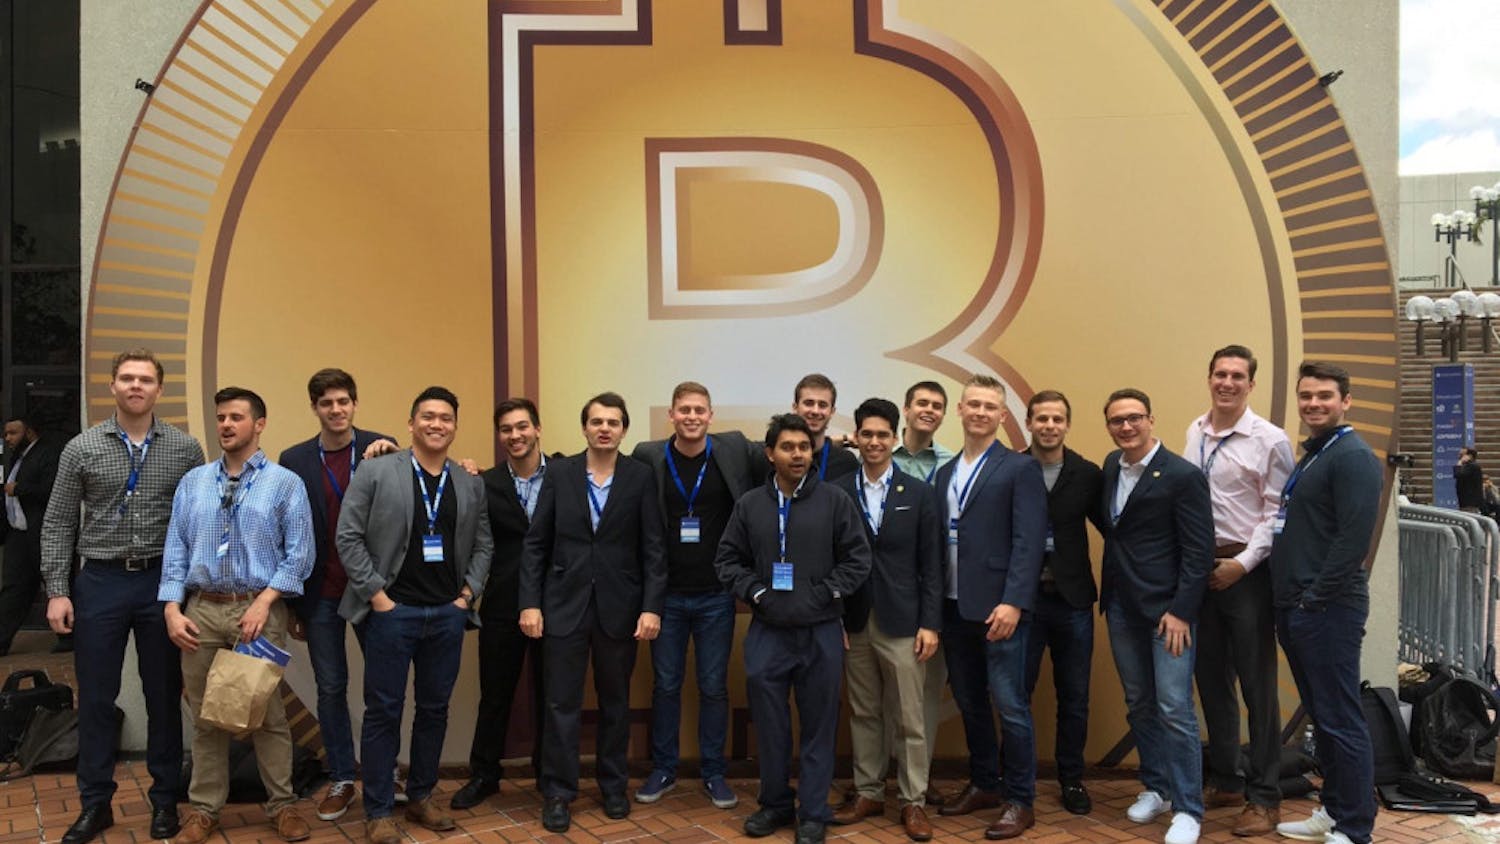 UF’s Bitcoin club attended The North American Bitcoin Conference on Thursday and Friday in South Florida. Some of the memebers later participated in a hackathon, where they won fourth place and .05 bitcoin or about $532.64.